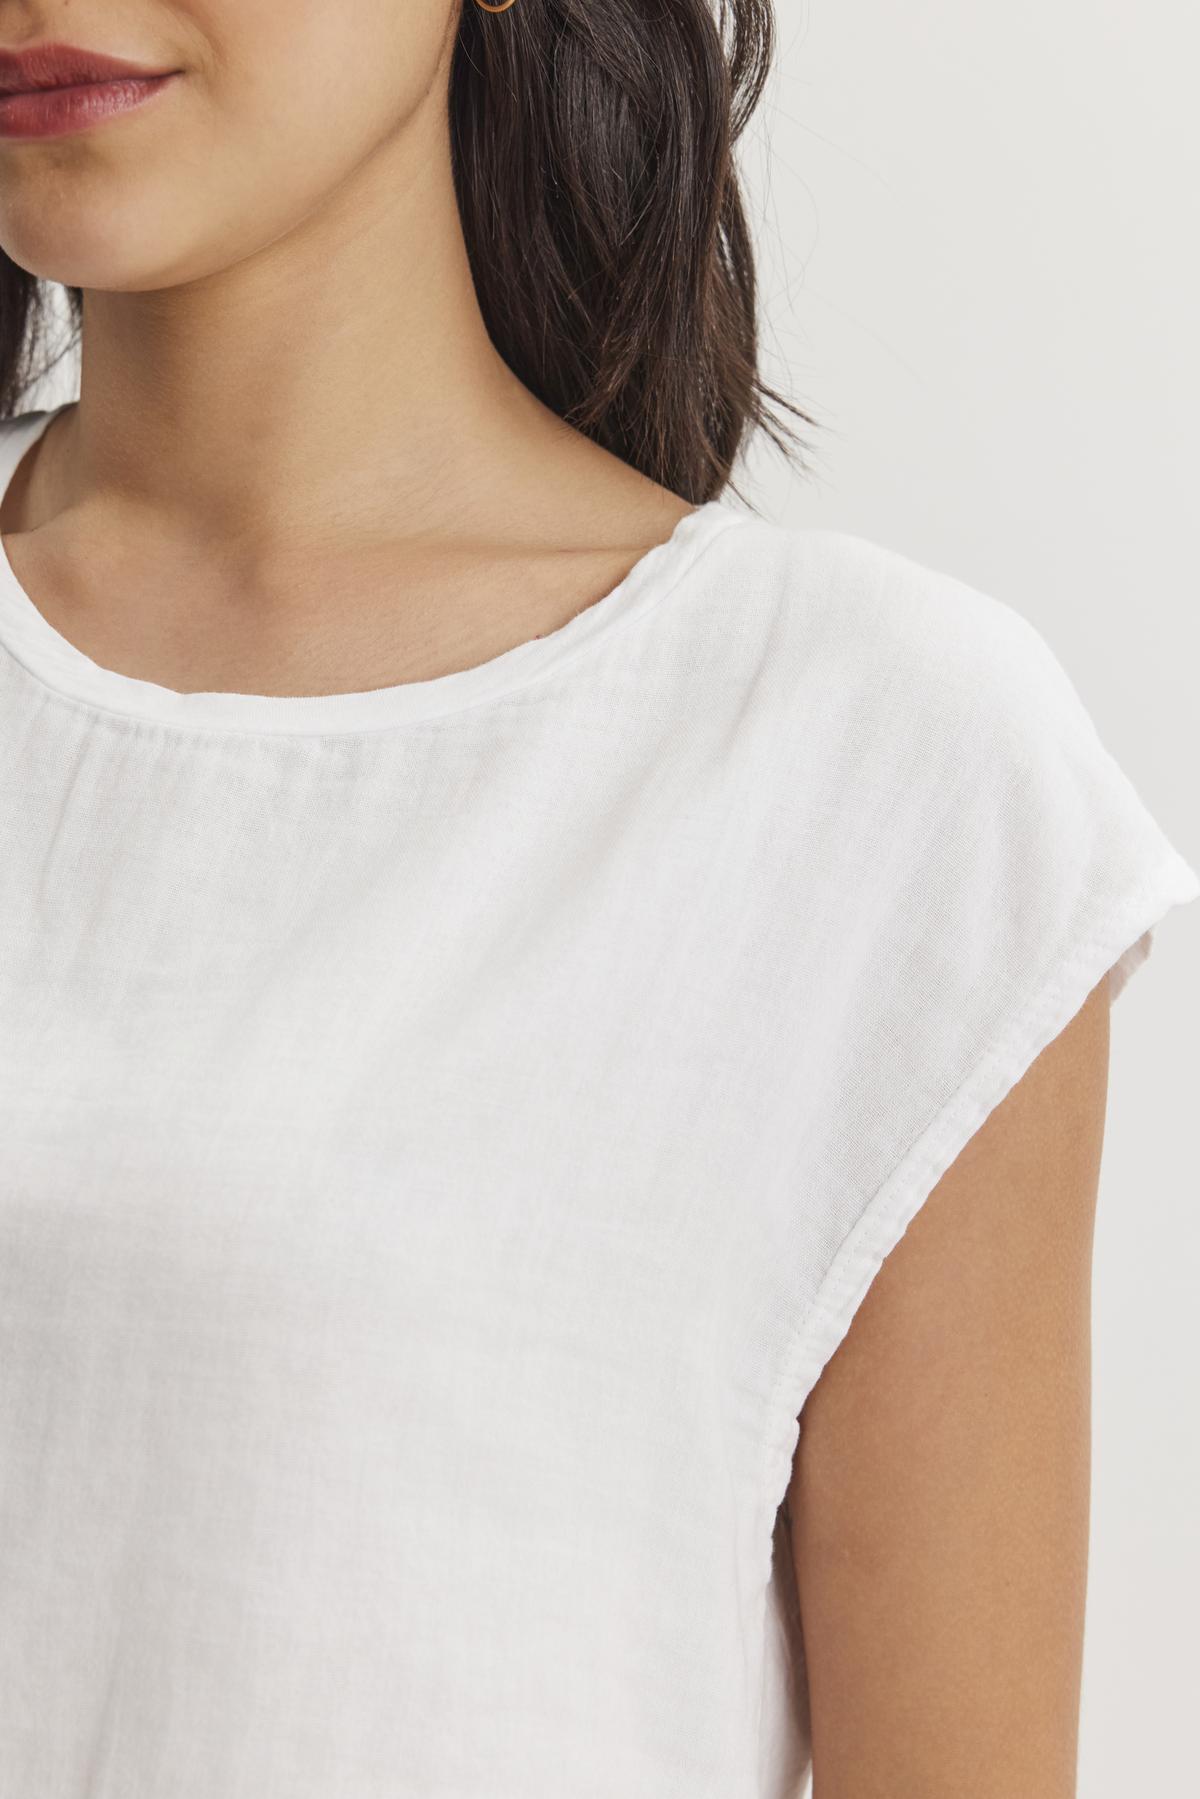 A close-up of a person wearing a white DANIELLA CREW NECK TEE from Velvet by Graham & Spencer made from lightweight cotton woven fabric. Only the lower half of their face and upper torso are visible, offering a casual basic look in a cropped silhouette.-37074421022913